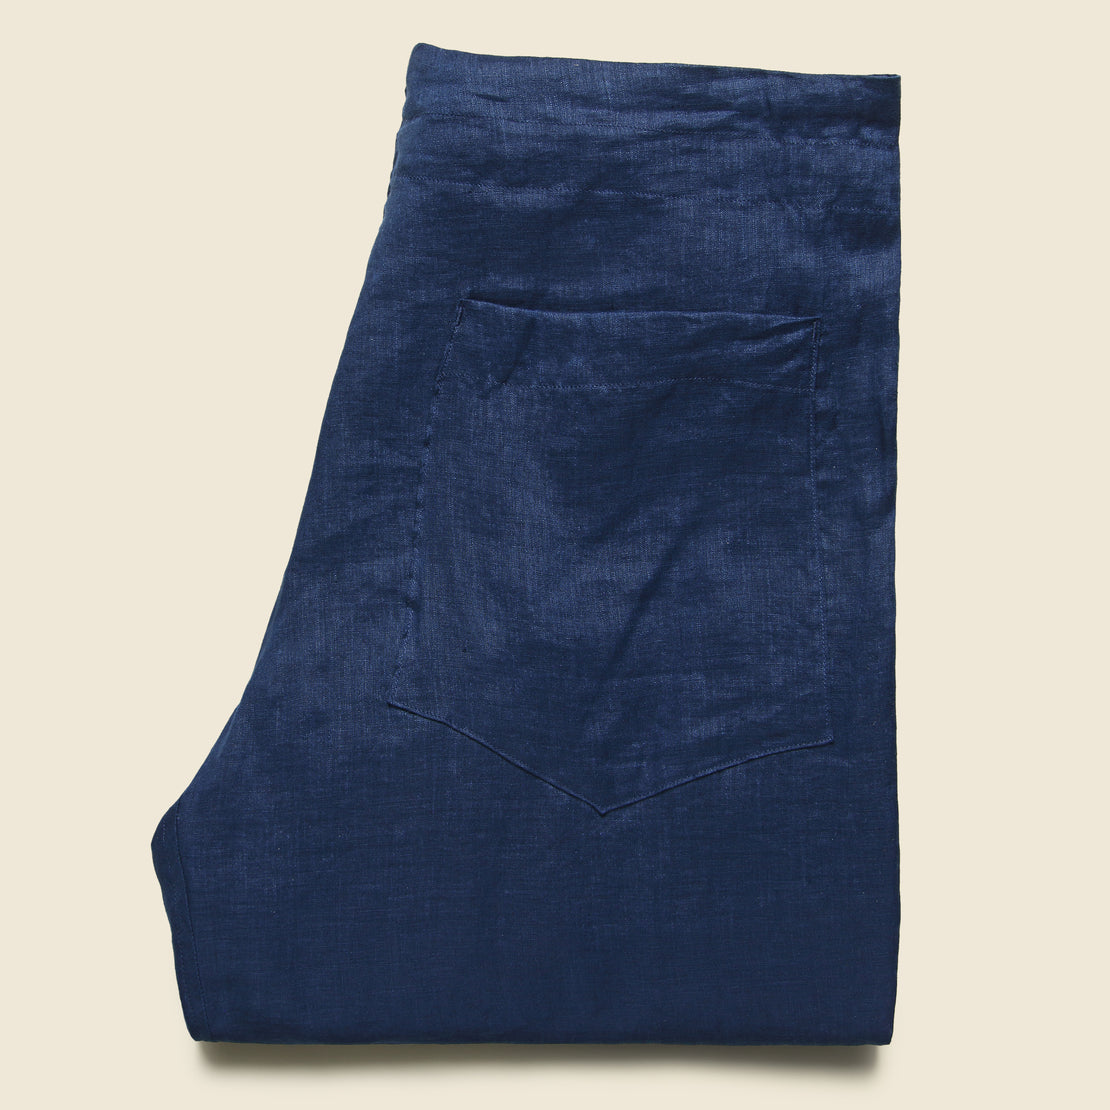 Linen Gathered Waist Pant - Navy - Monitaly - STAG Provisions - W - Pants - Twill